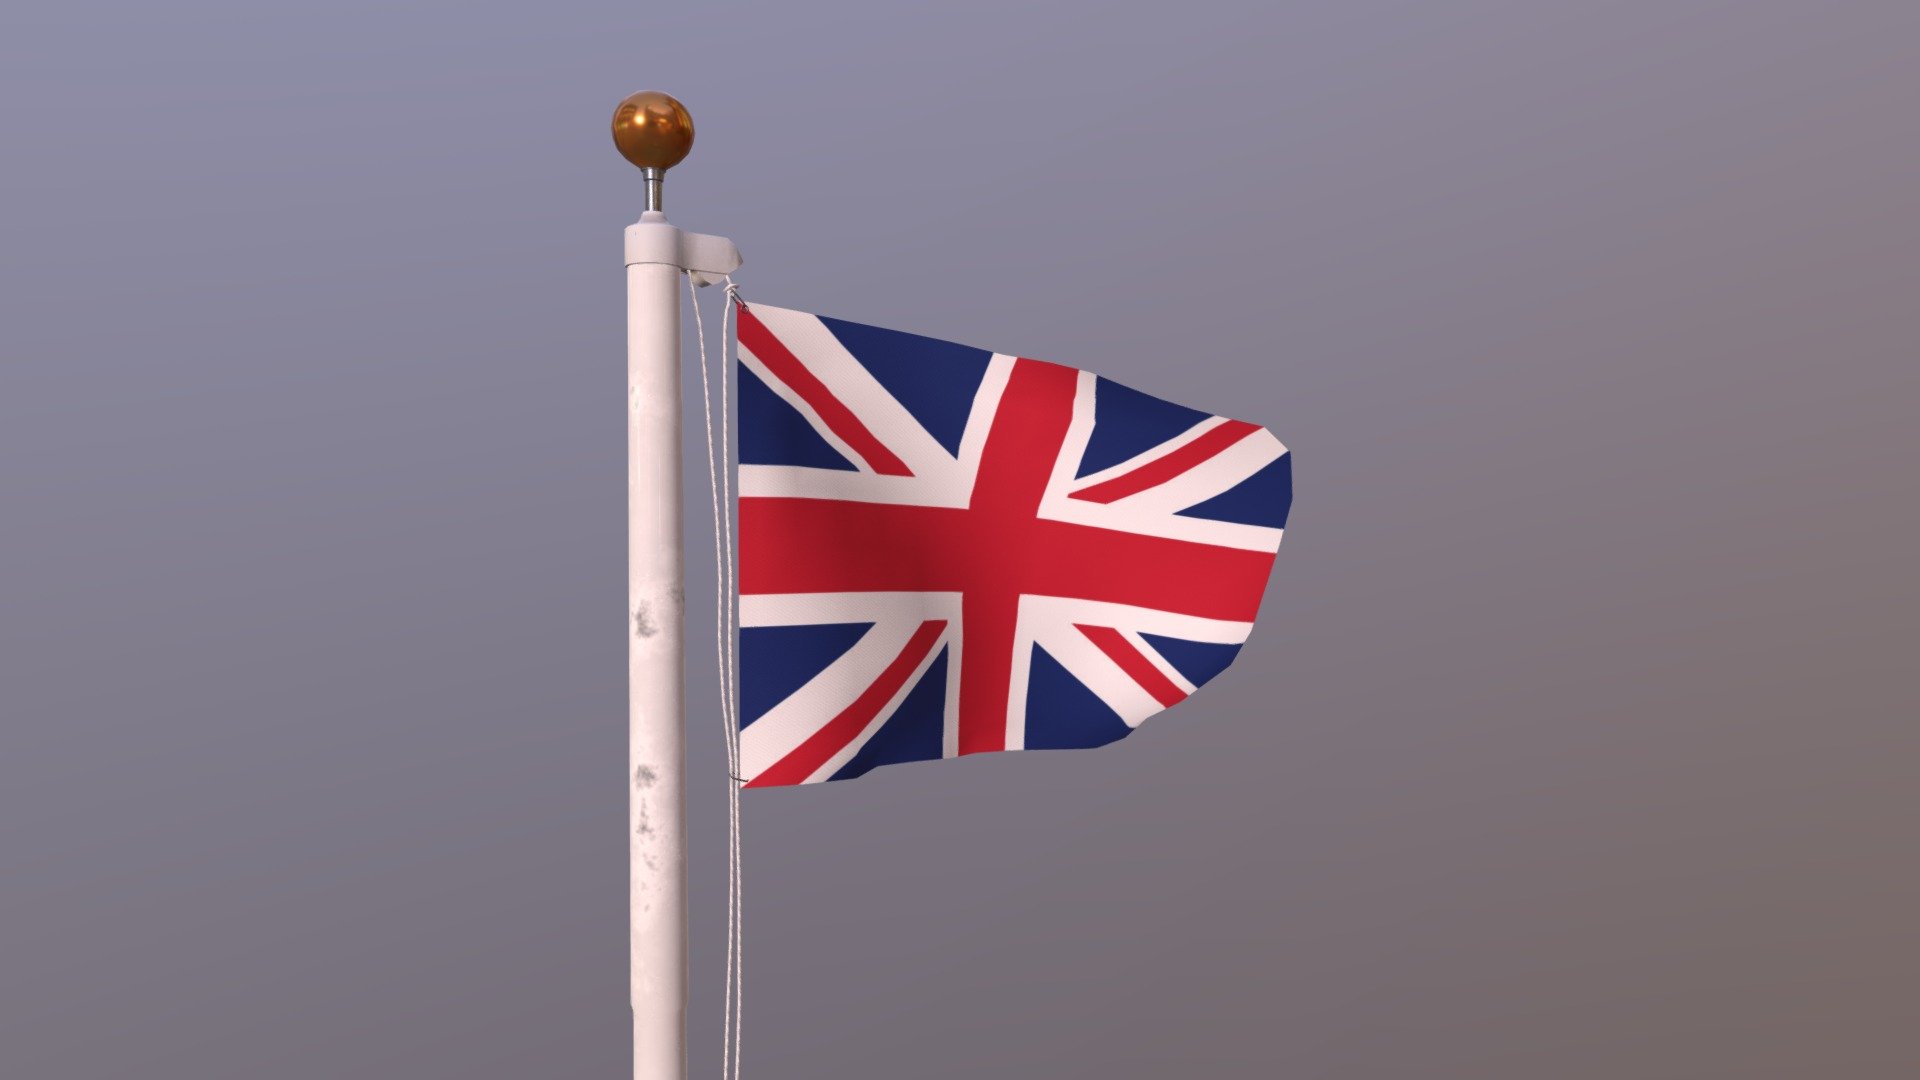 Flag of United Kingdom (waving in the wind)

A low poly 3D model of an animated and rigged flag. The low poly flag was modeled and prepared for low-poly style renderings, general visualization, background.

UV Layout maps and Image Textures resolutions: 1024x1024 px; PBR Textures created and baked (SimpleBake) in Blender and included diffuse, roughness, metalness and normal maps. 
The entourage is separate object, 2D girl for visual scale (175 cm) plus terrain, and have simple material with colors and it's just for presentation.

The animation has 190 frames.

Details:

real world dimensions




Flag cloth size

-length: 140 cm
-width: 90 cm




Flagpole size

-diameter: 10 cm
-height: 680 cm - Flag of United Kingdom (animated) - 3D model by mihais (@m1hais) 3d model